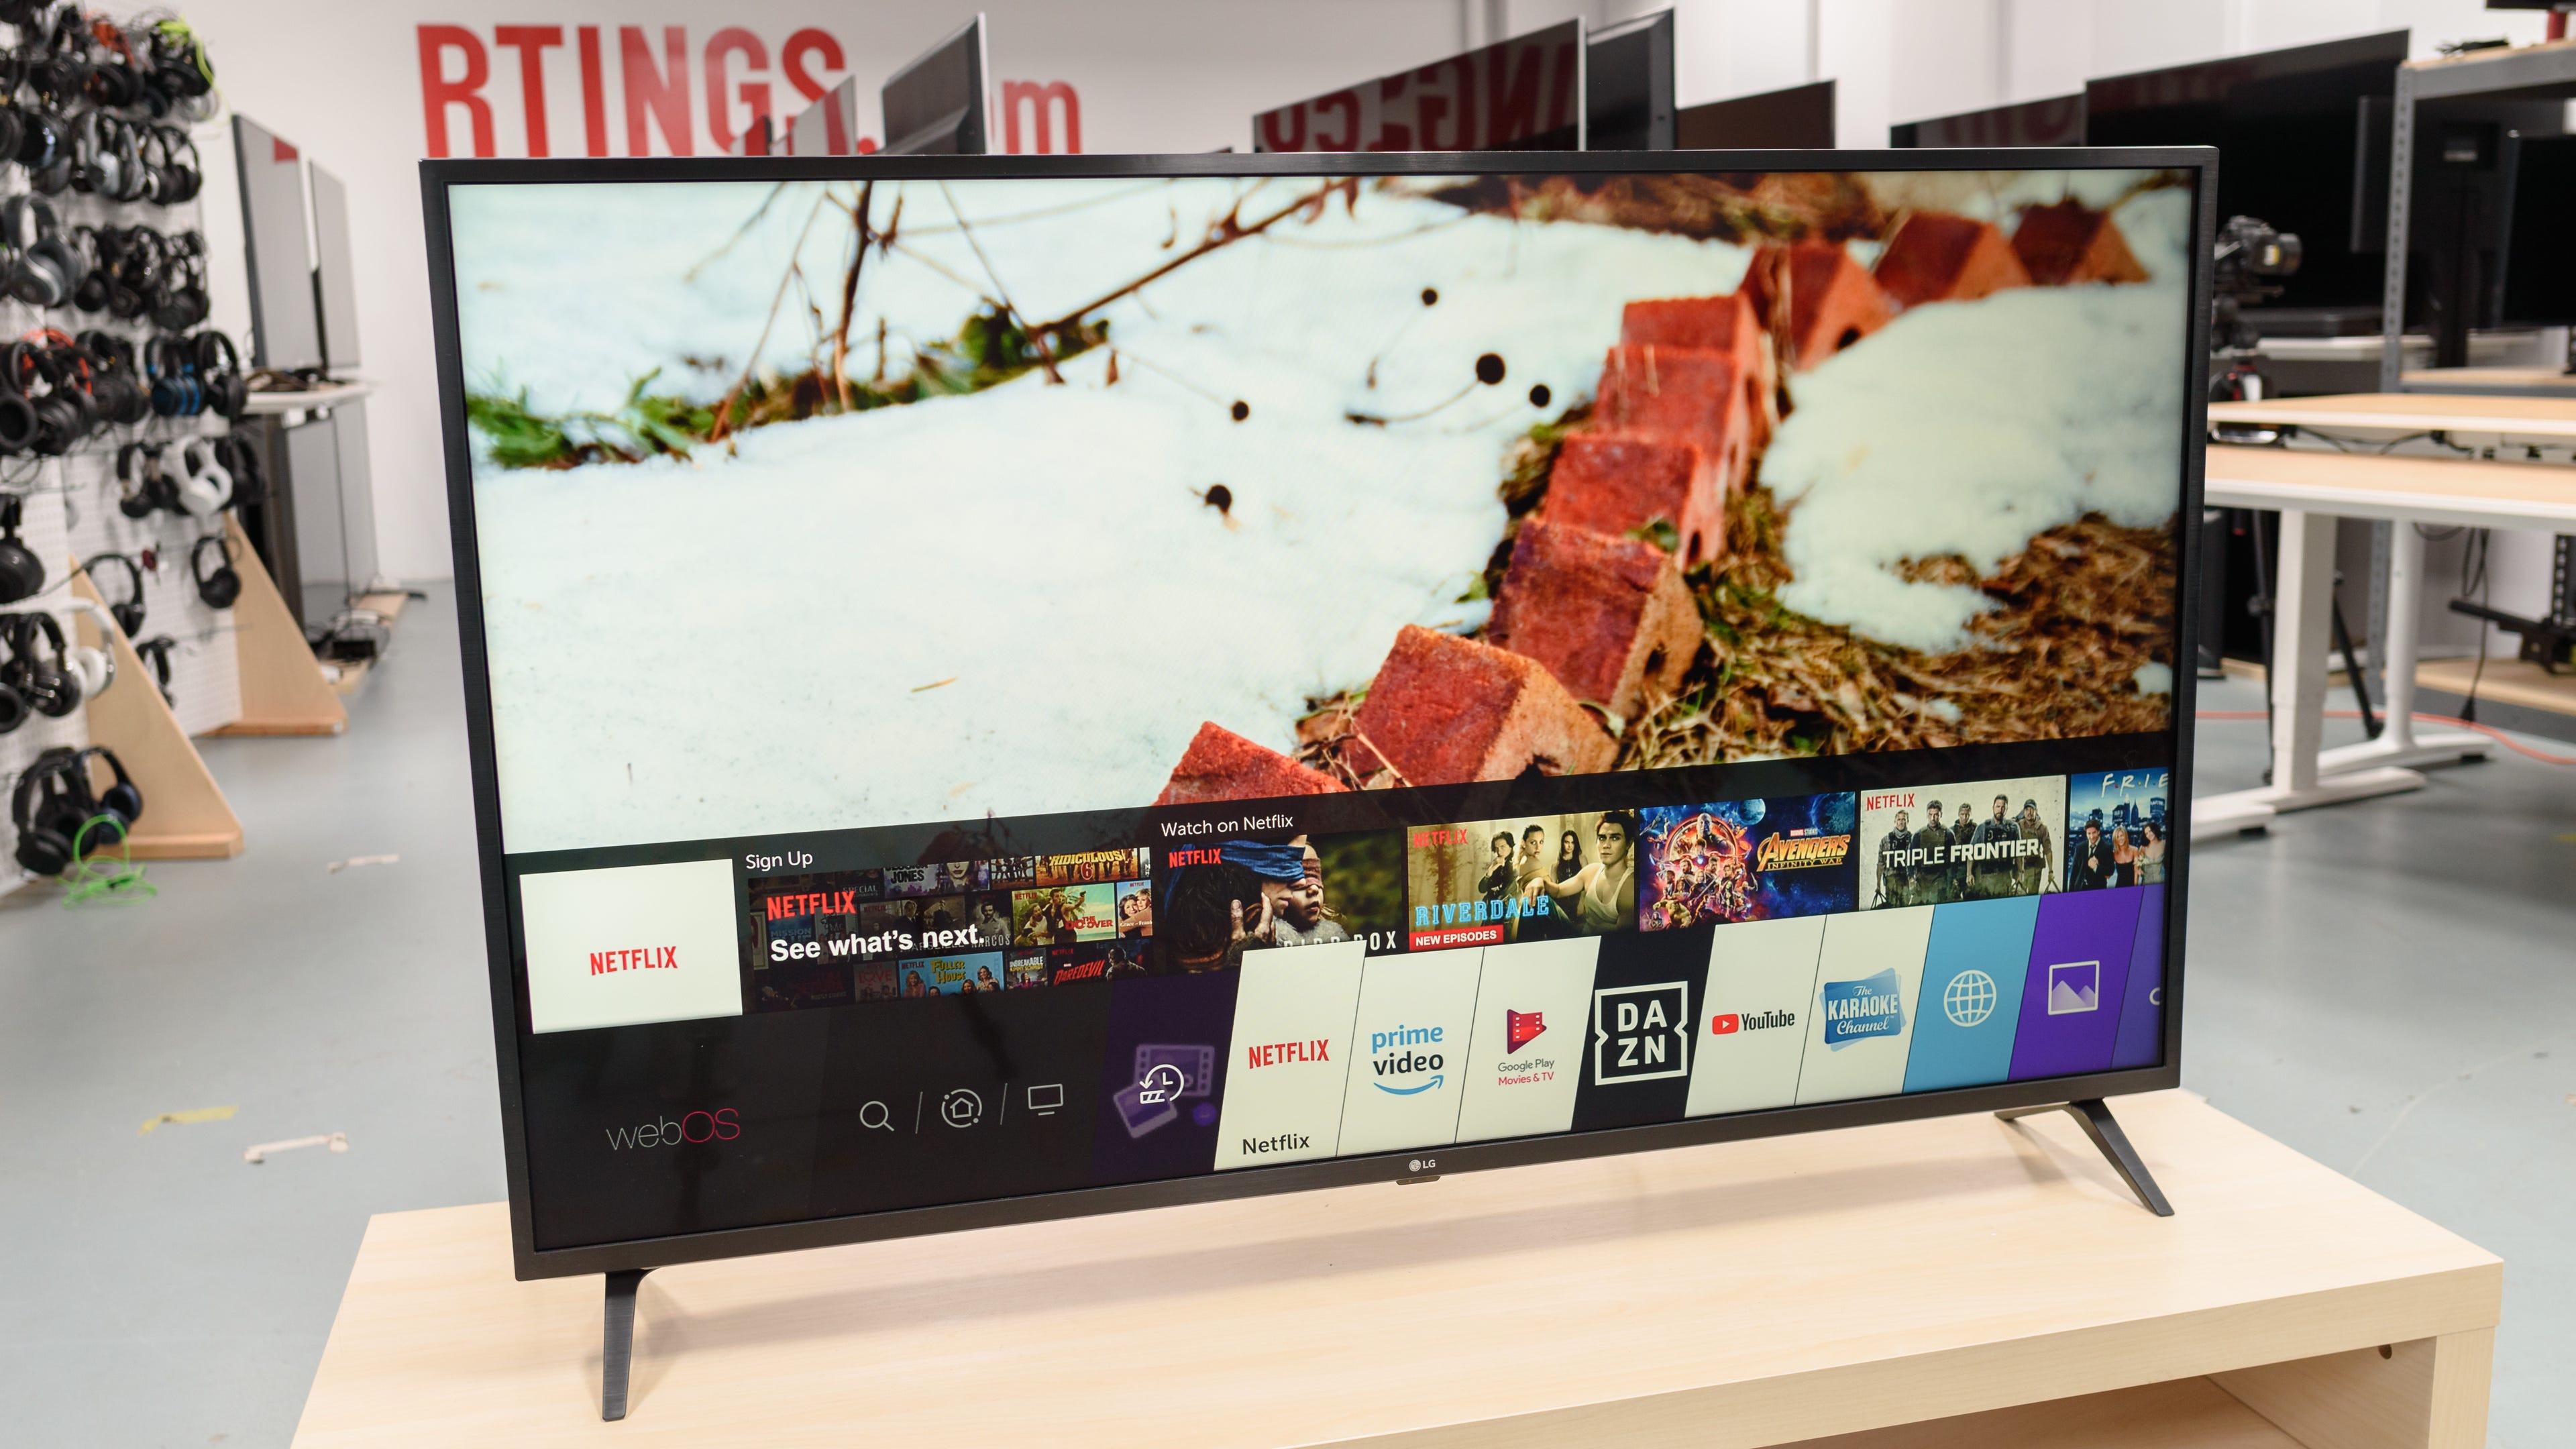 LG 55UM7300PUA Review: Best Smart TV for the price | by Techmagnet | Medium